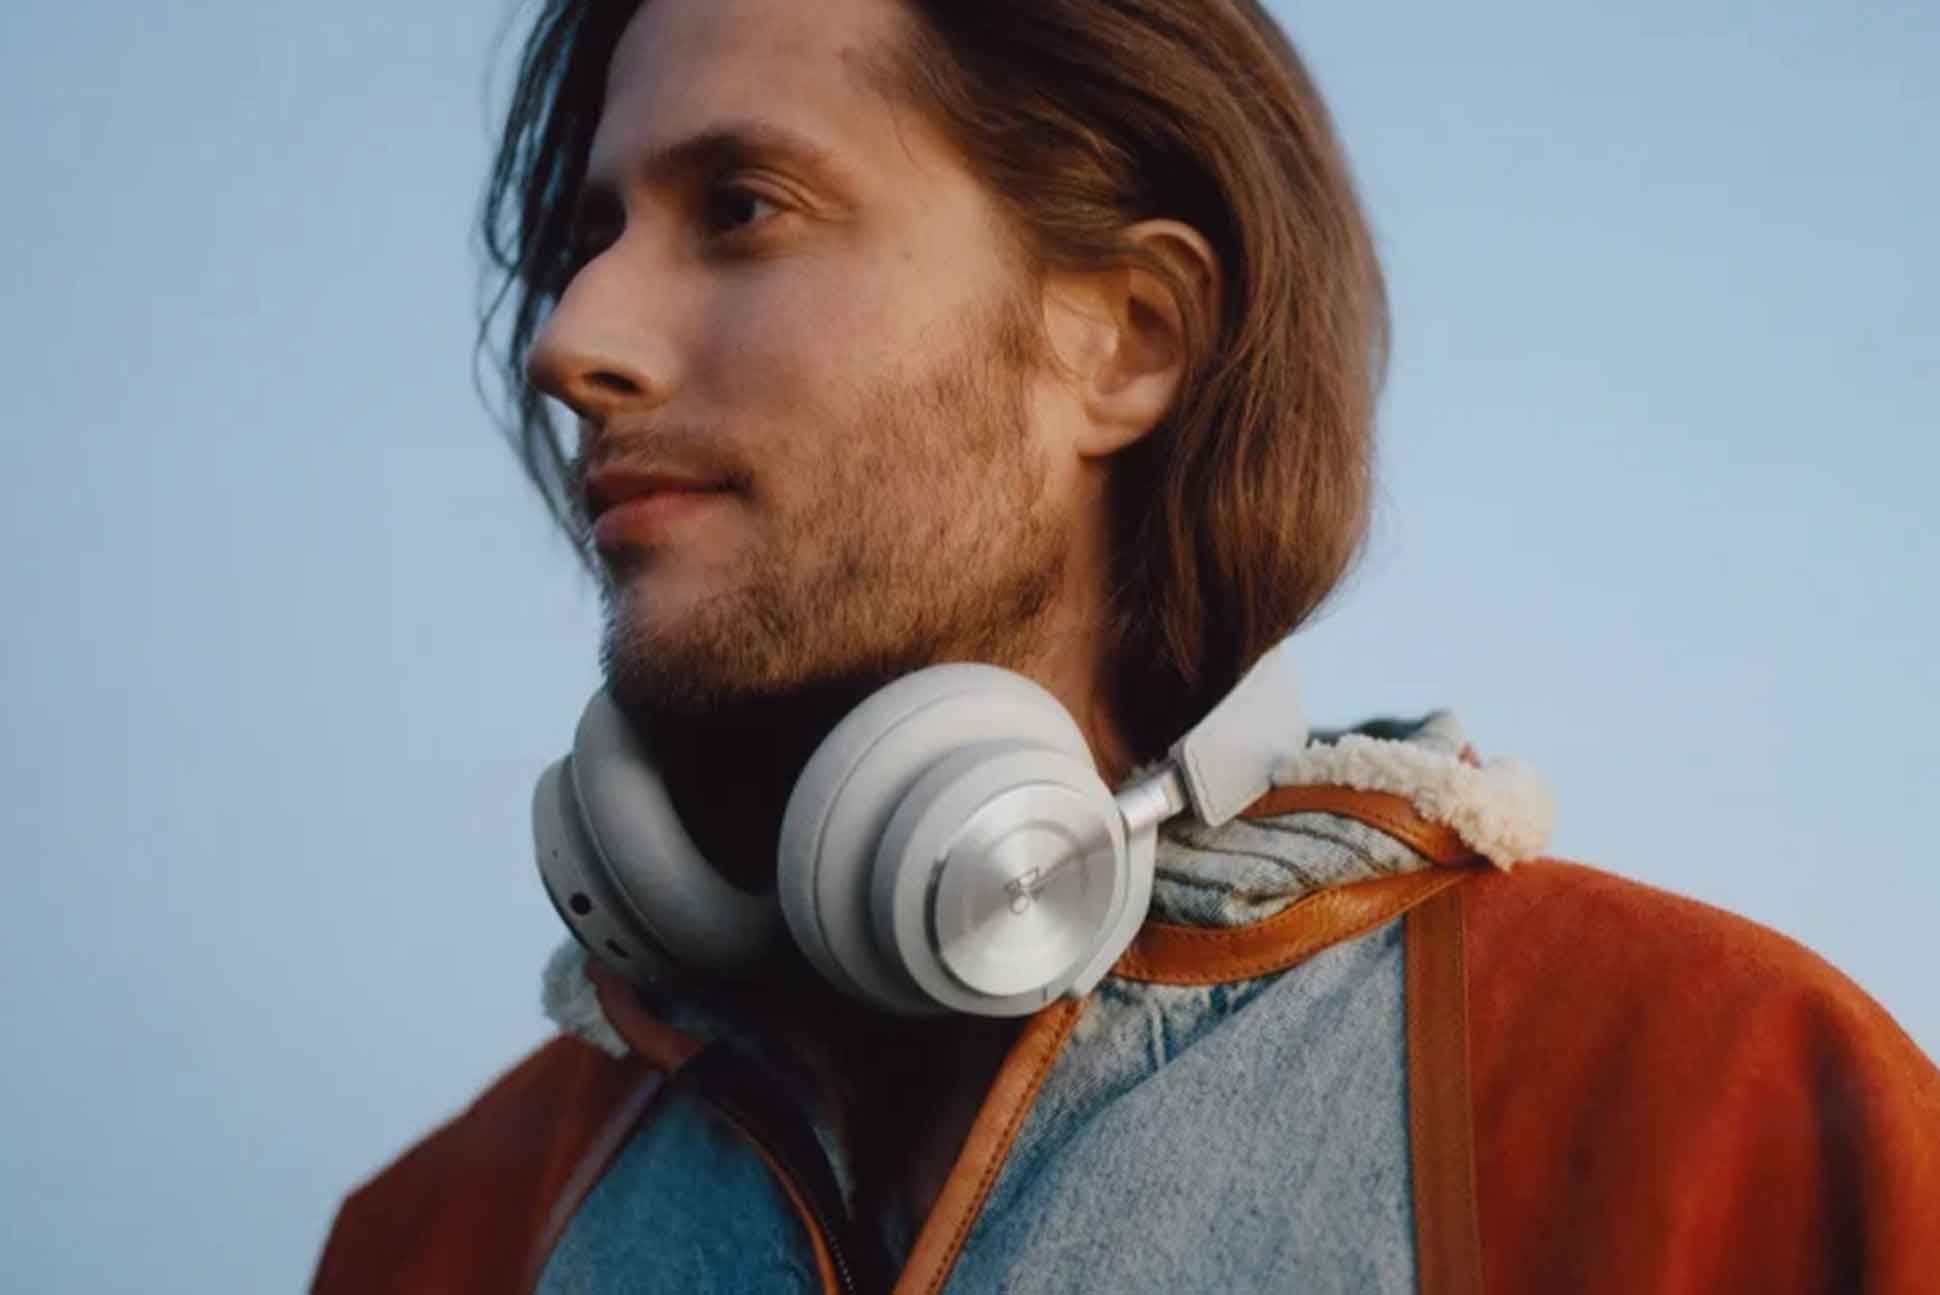 beoplay h9i rimowa edition